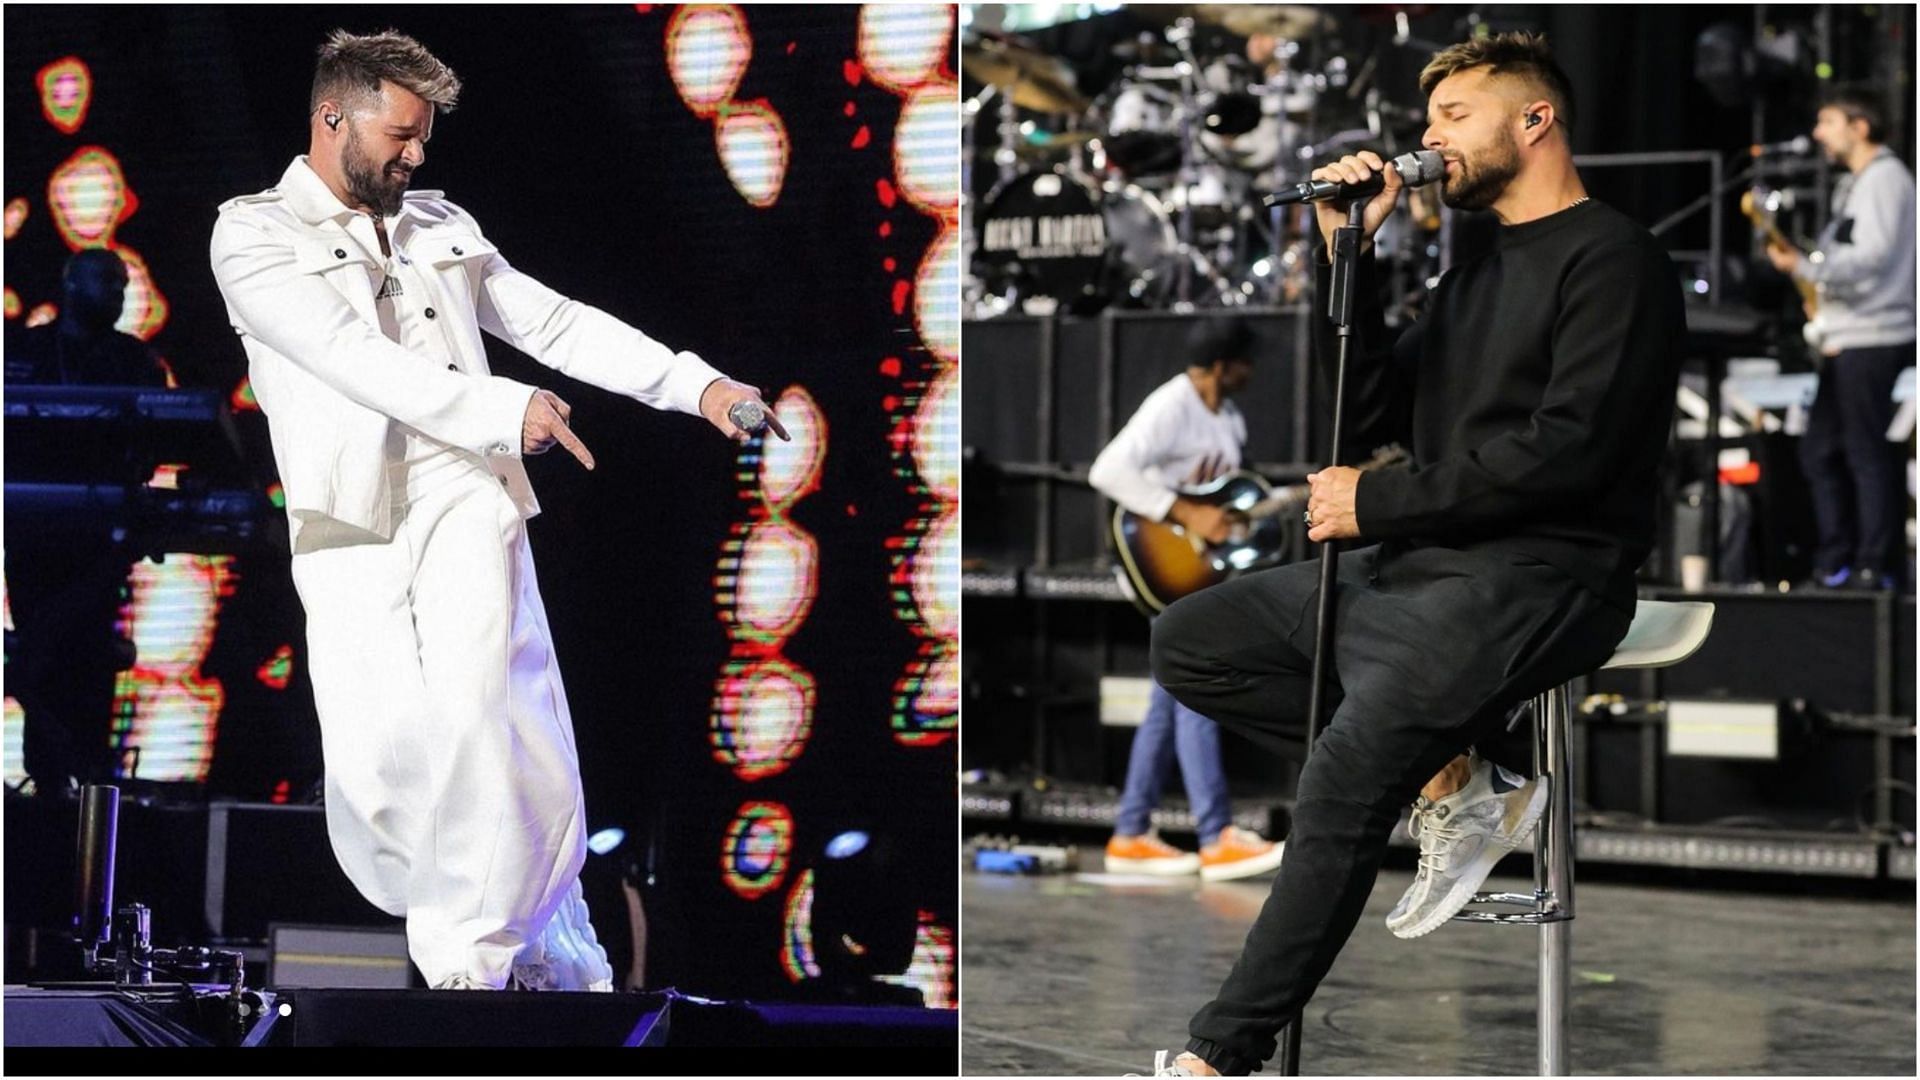 Ricky Martin has been sued for over $3 million. (Images via Instagram/@ricky_martin)